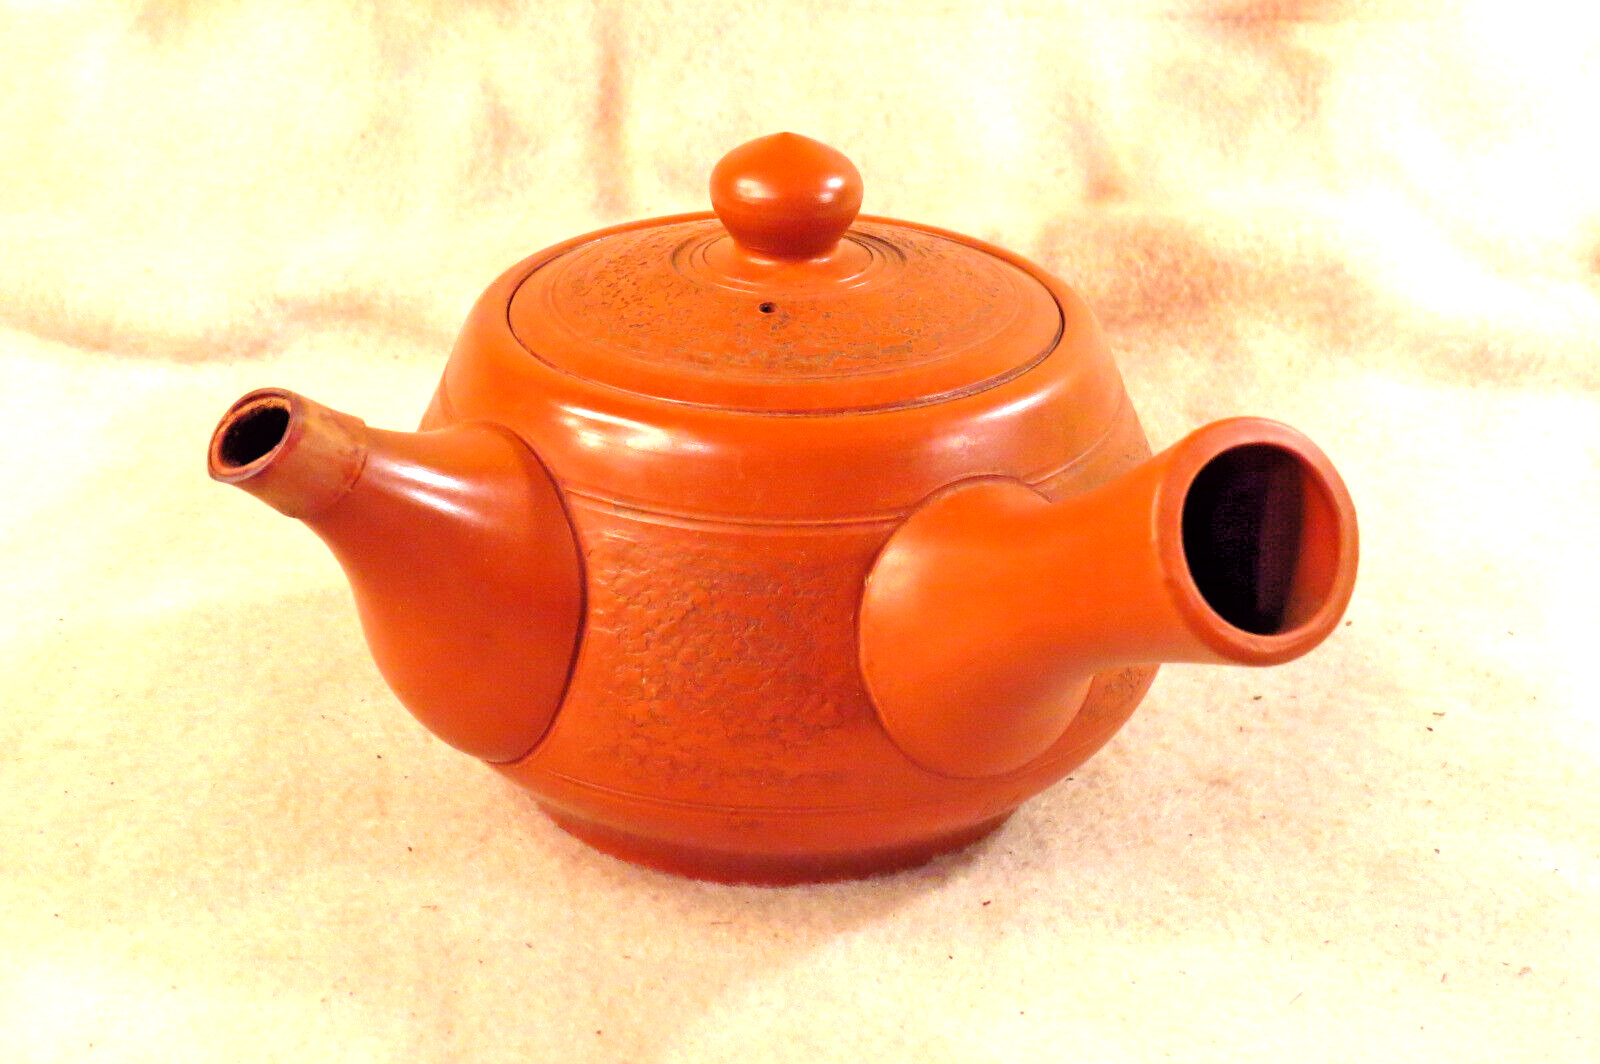 Antique Teapot Kyusu 2 Strainers Shudei Pottery Jinsui Japan STAMPED Red Clay